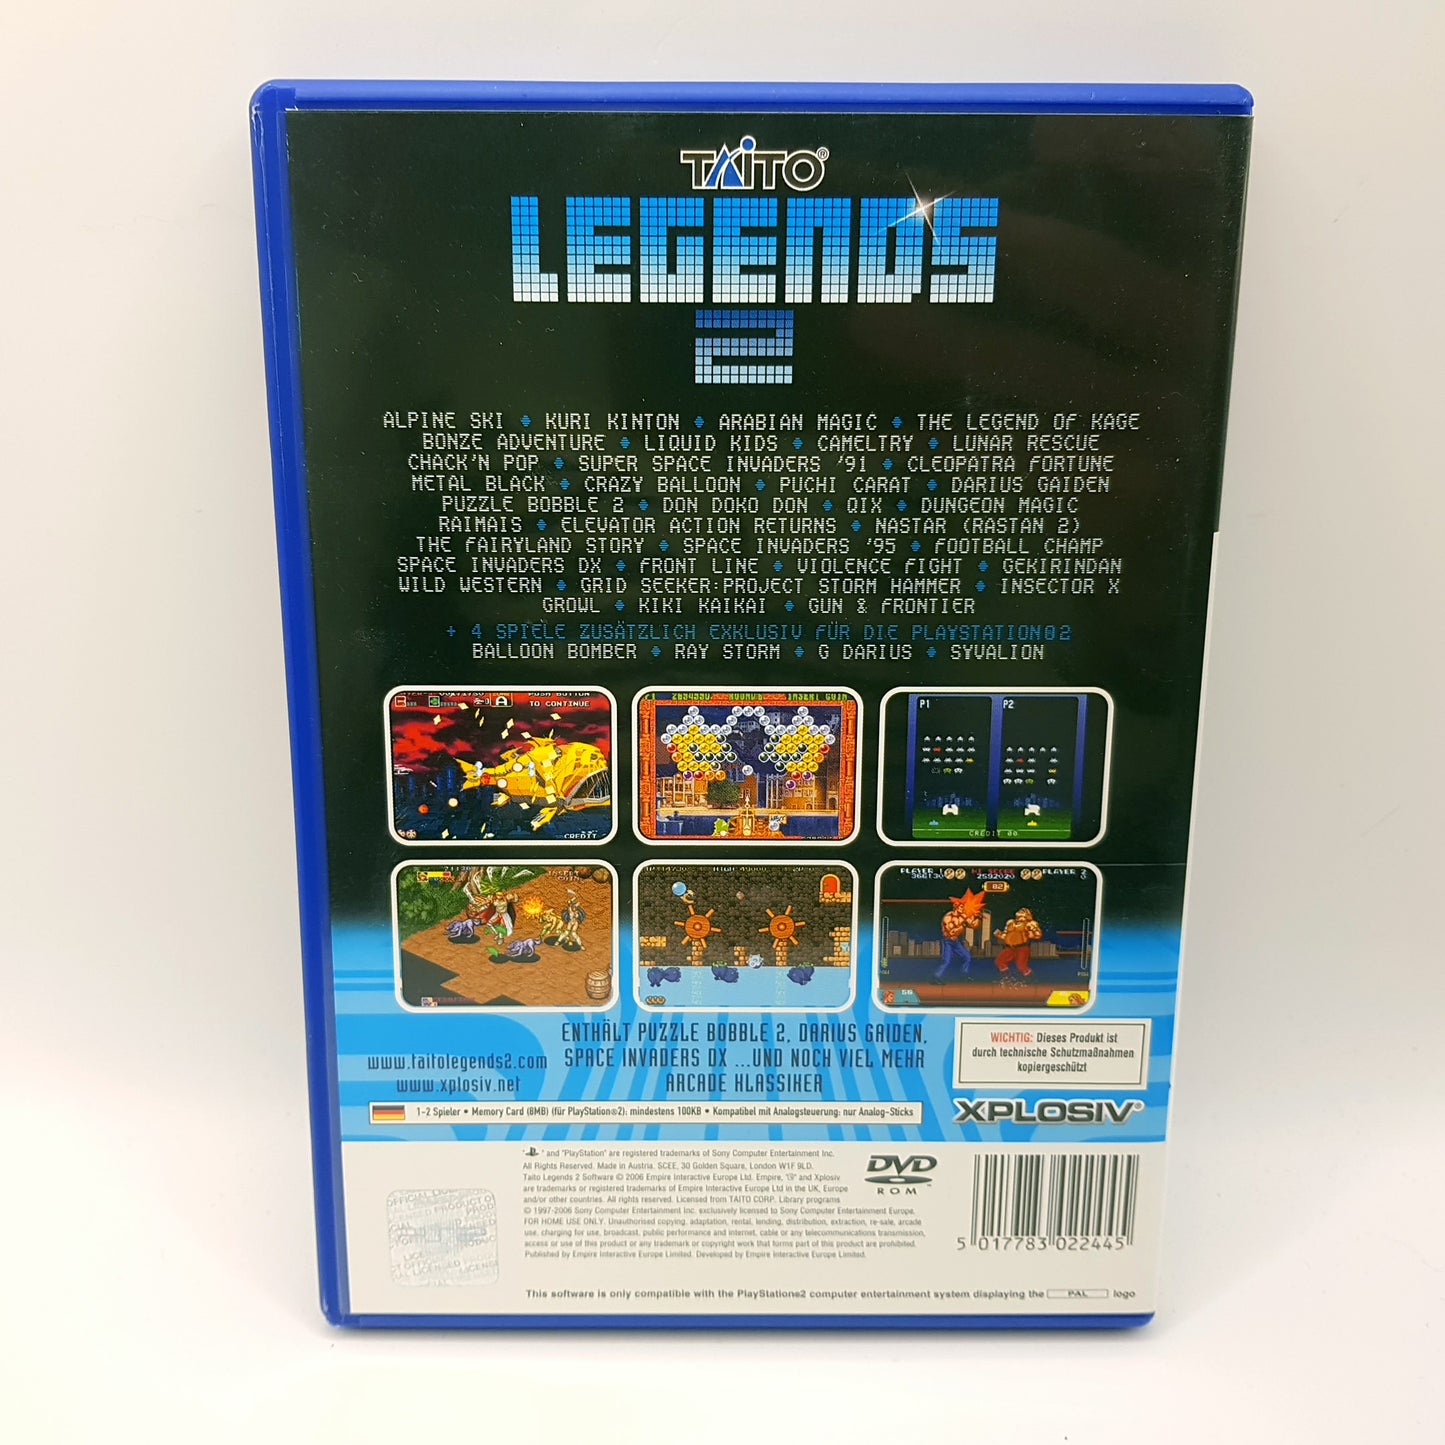 Playstation 2 Ps2 - Taito Legends 2 (Puzzle Bobble 2, Darius Gaiden, Space Invaders DX, etc.) - gebraucht